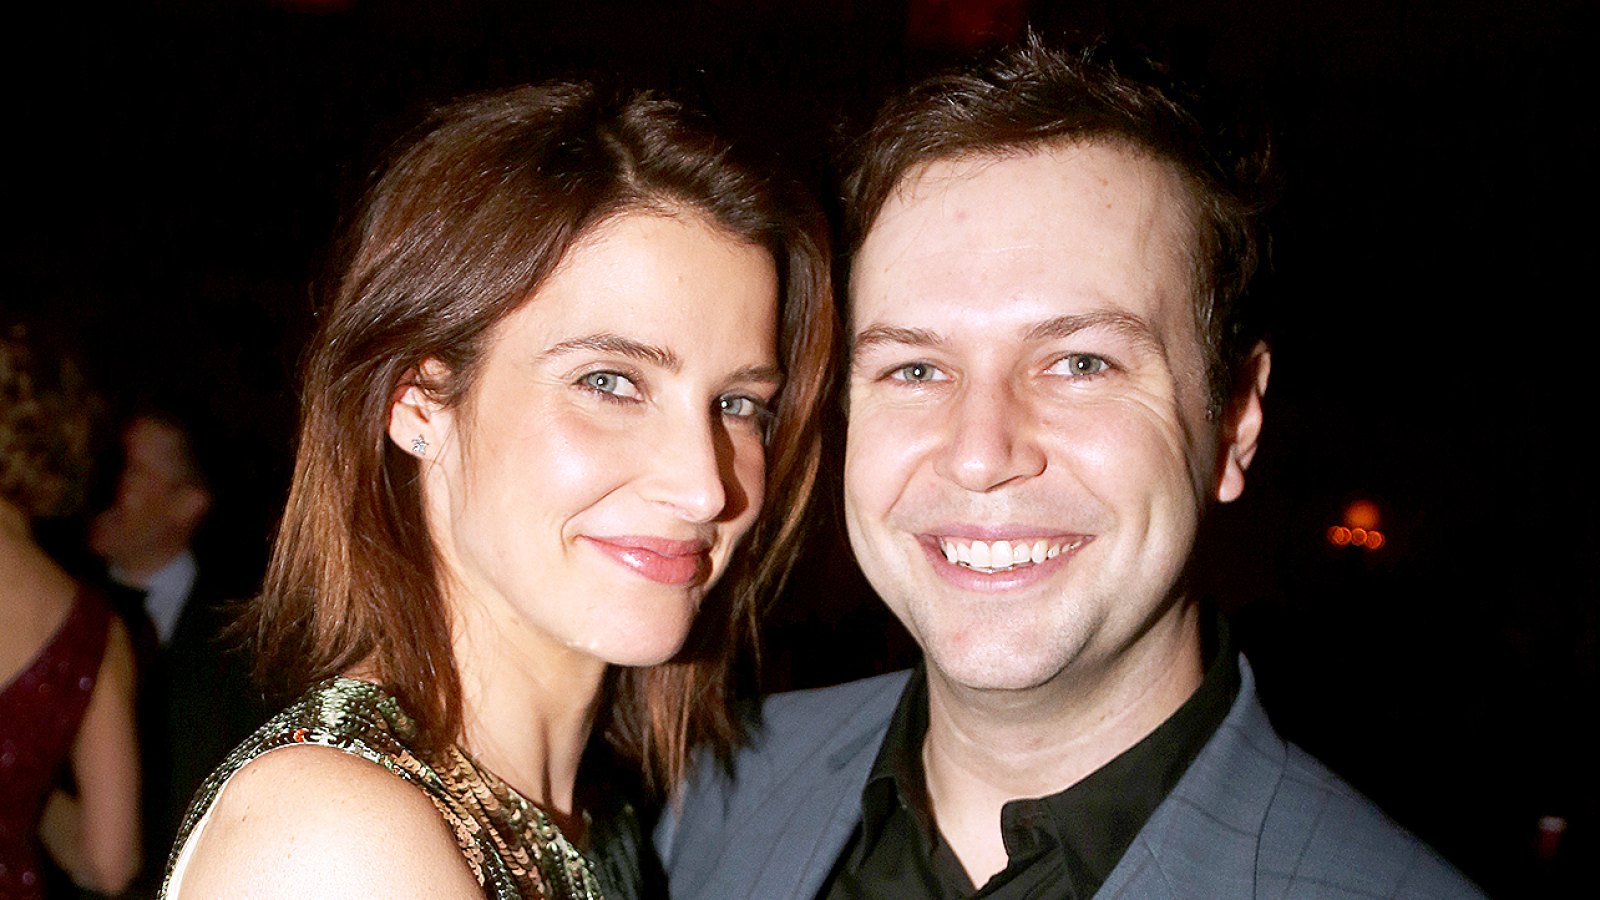 Cobie Smulders and Taran Killam pose at the opening night after party for "Present Laughter" at Gotham Hall on April 5, 2017 in New York City.